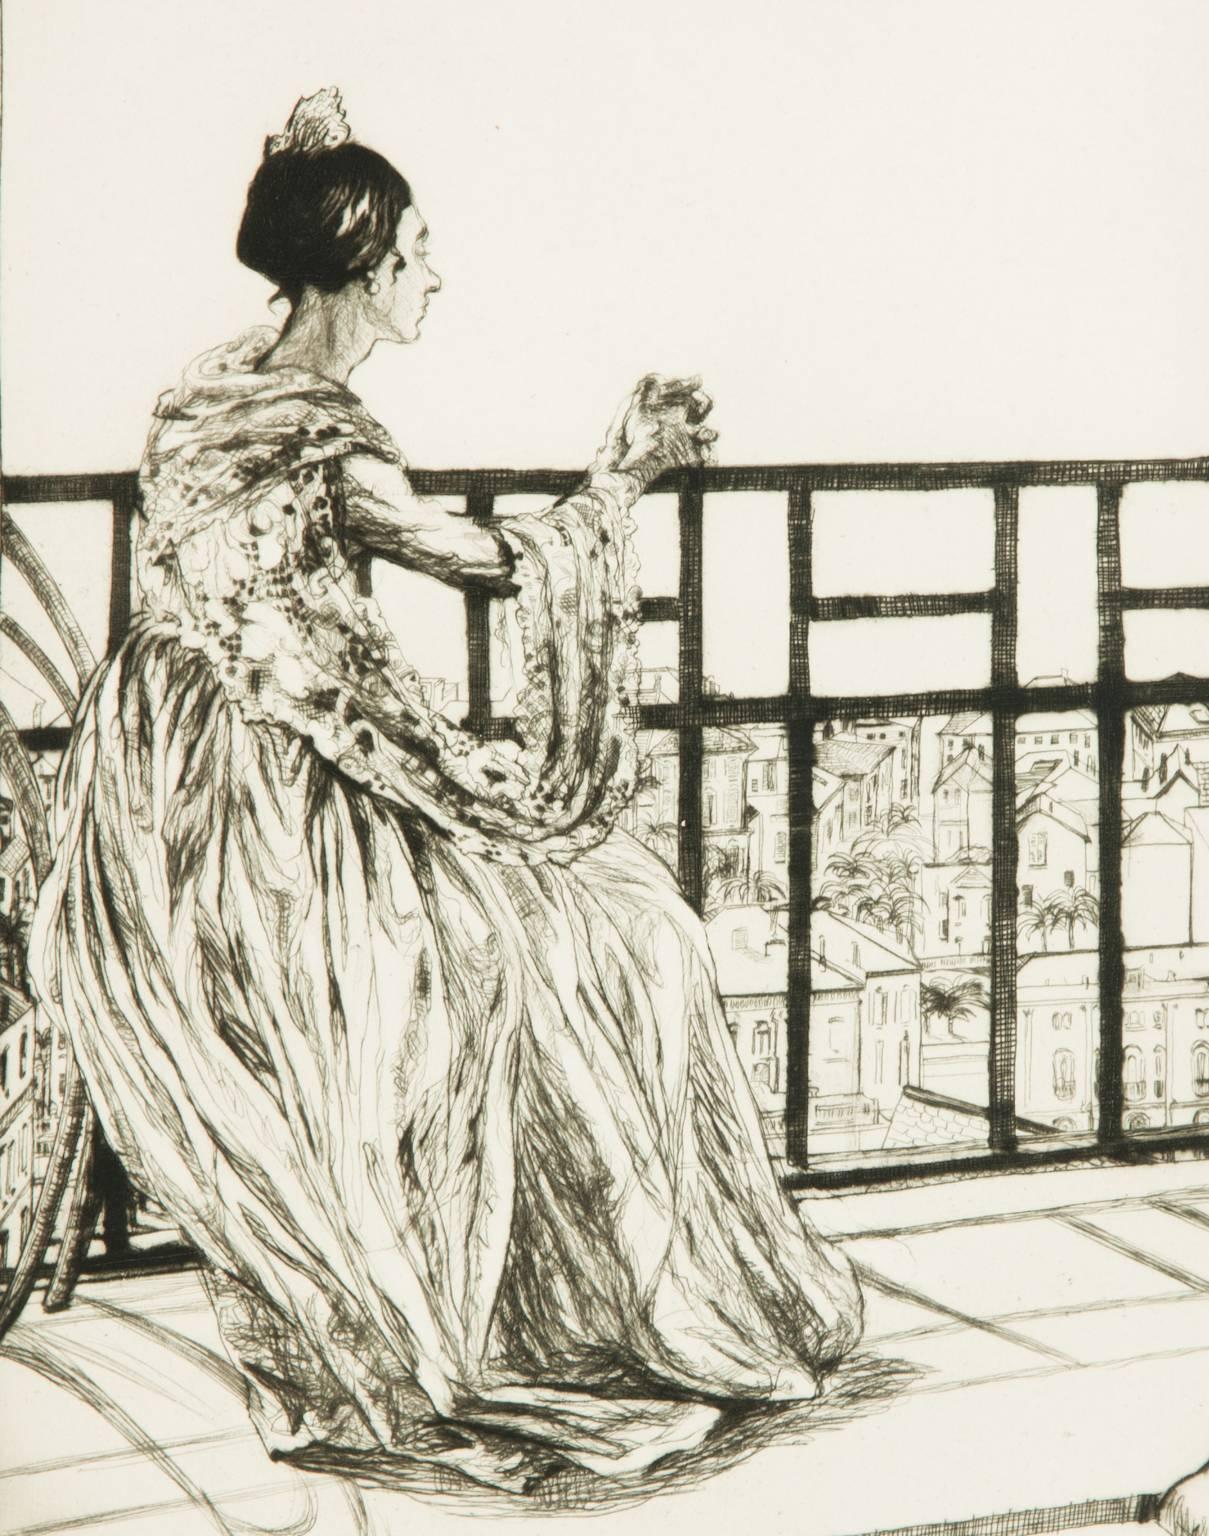 A beautiful signed mid 20th century drypoint etching by Ethel Gabain (1883-1950), depicting a French woman seated on a balcony. Presented in a card mount and gilt and black frame. Signed to the lower right by the artist. Etched onto wove